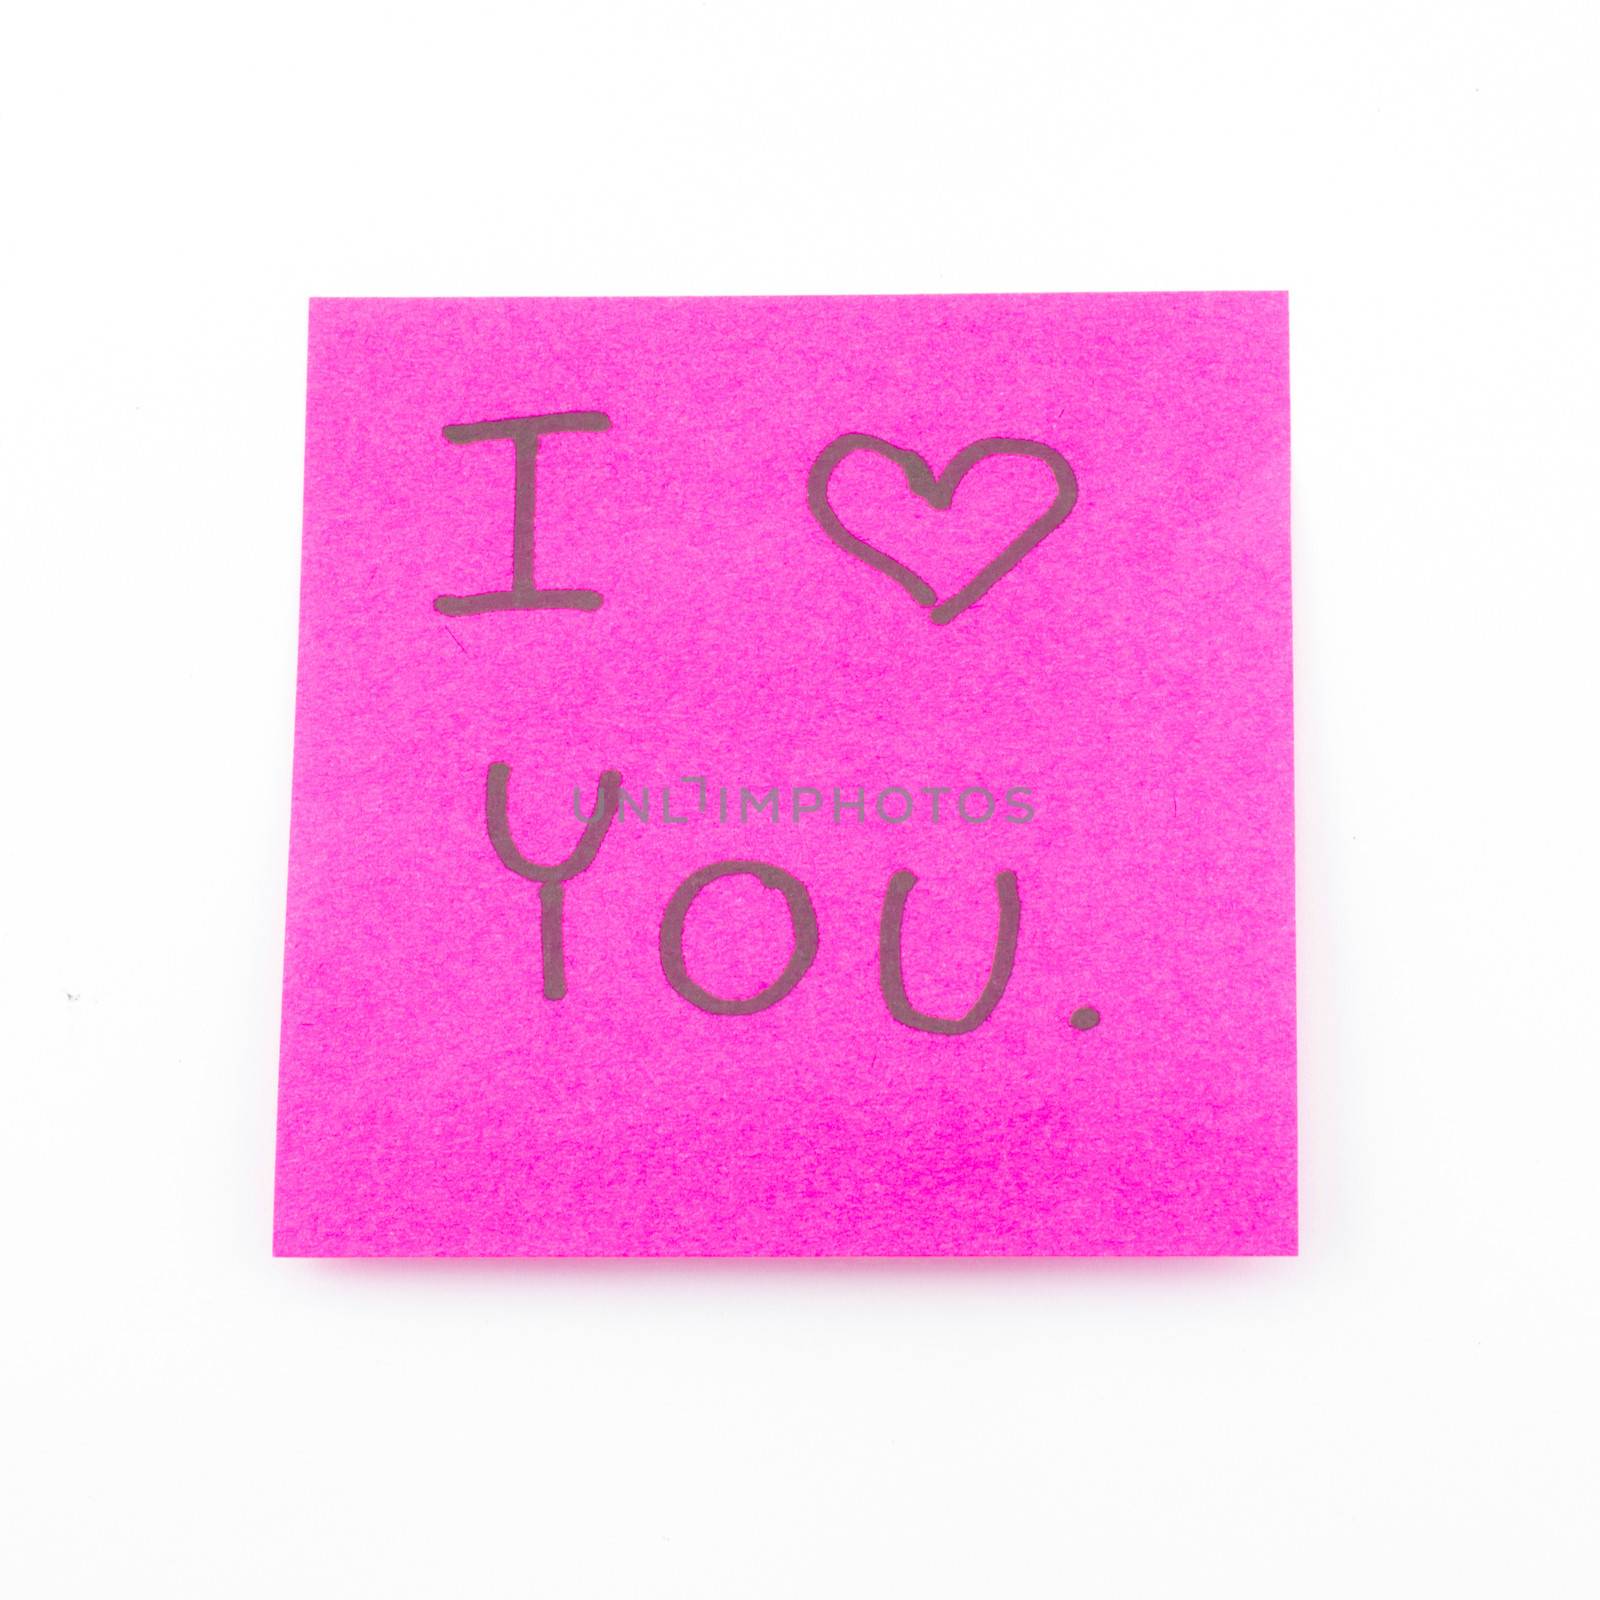 I love you on post it by ammza12